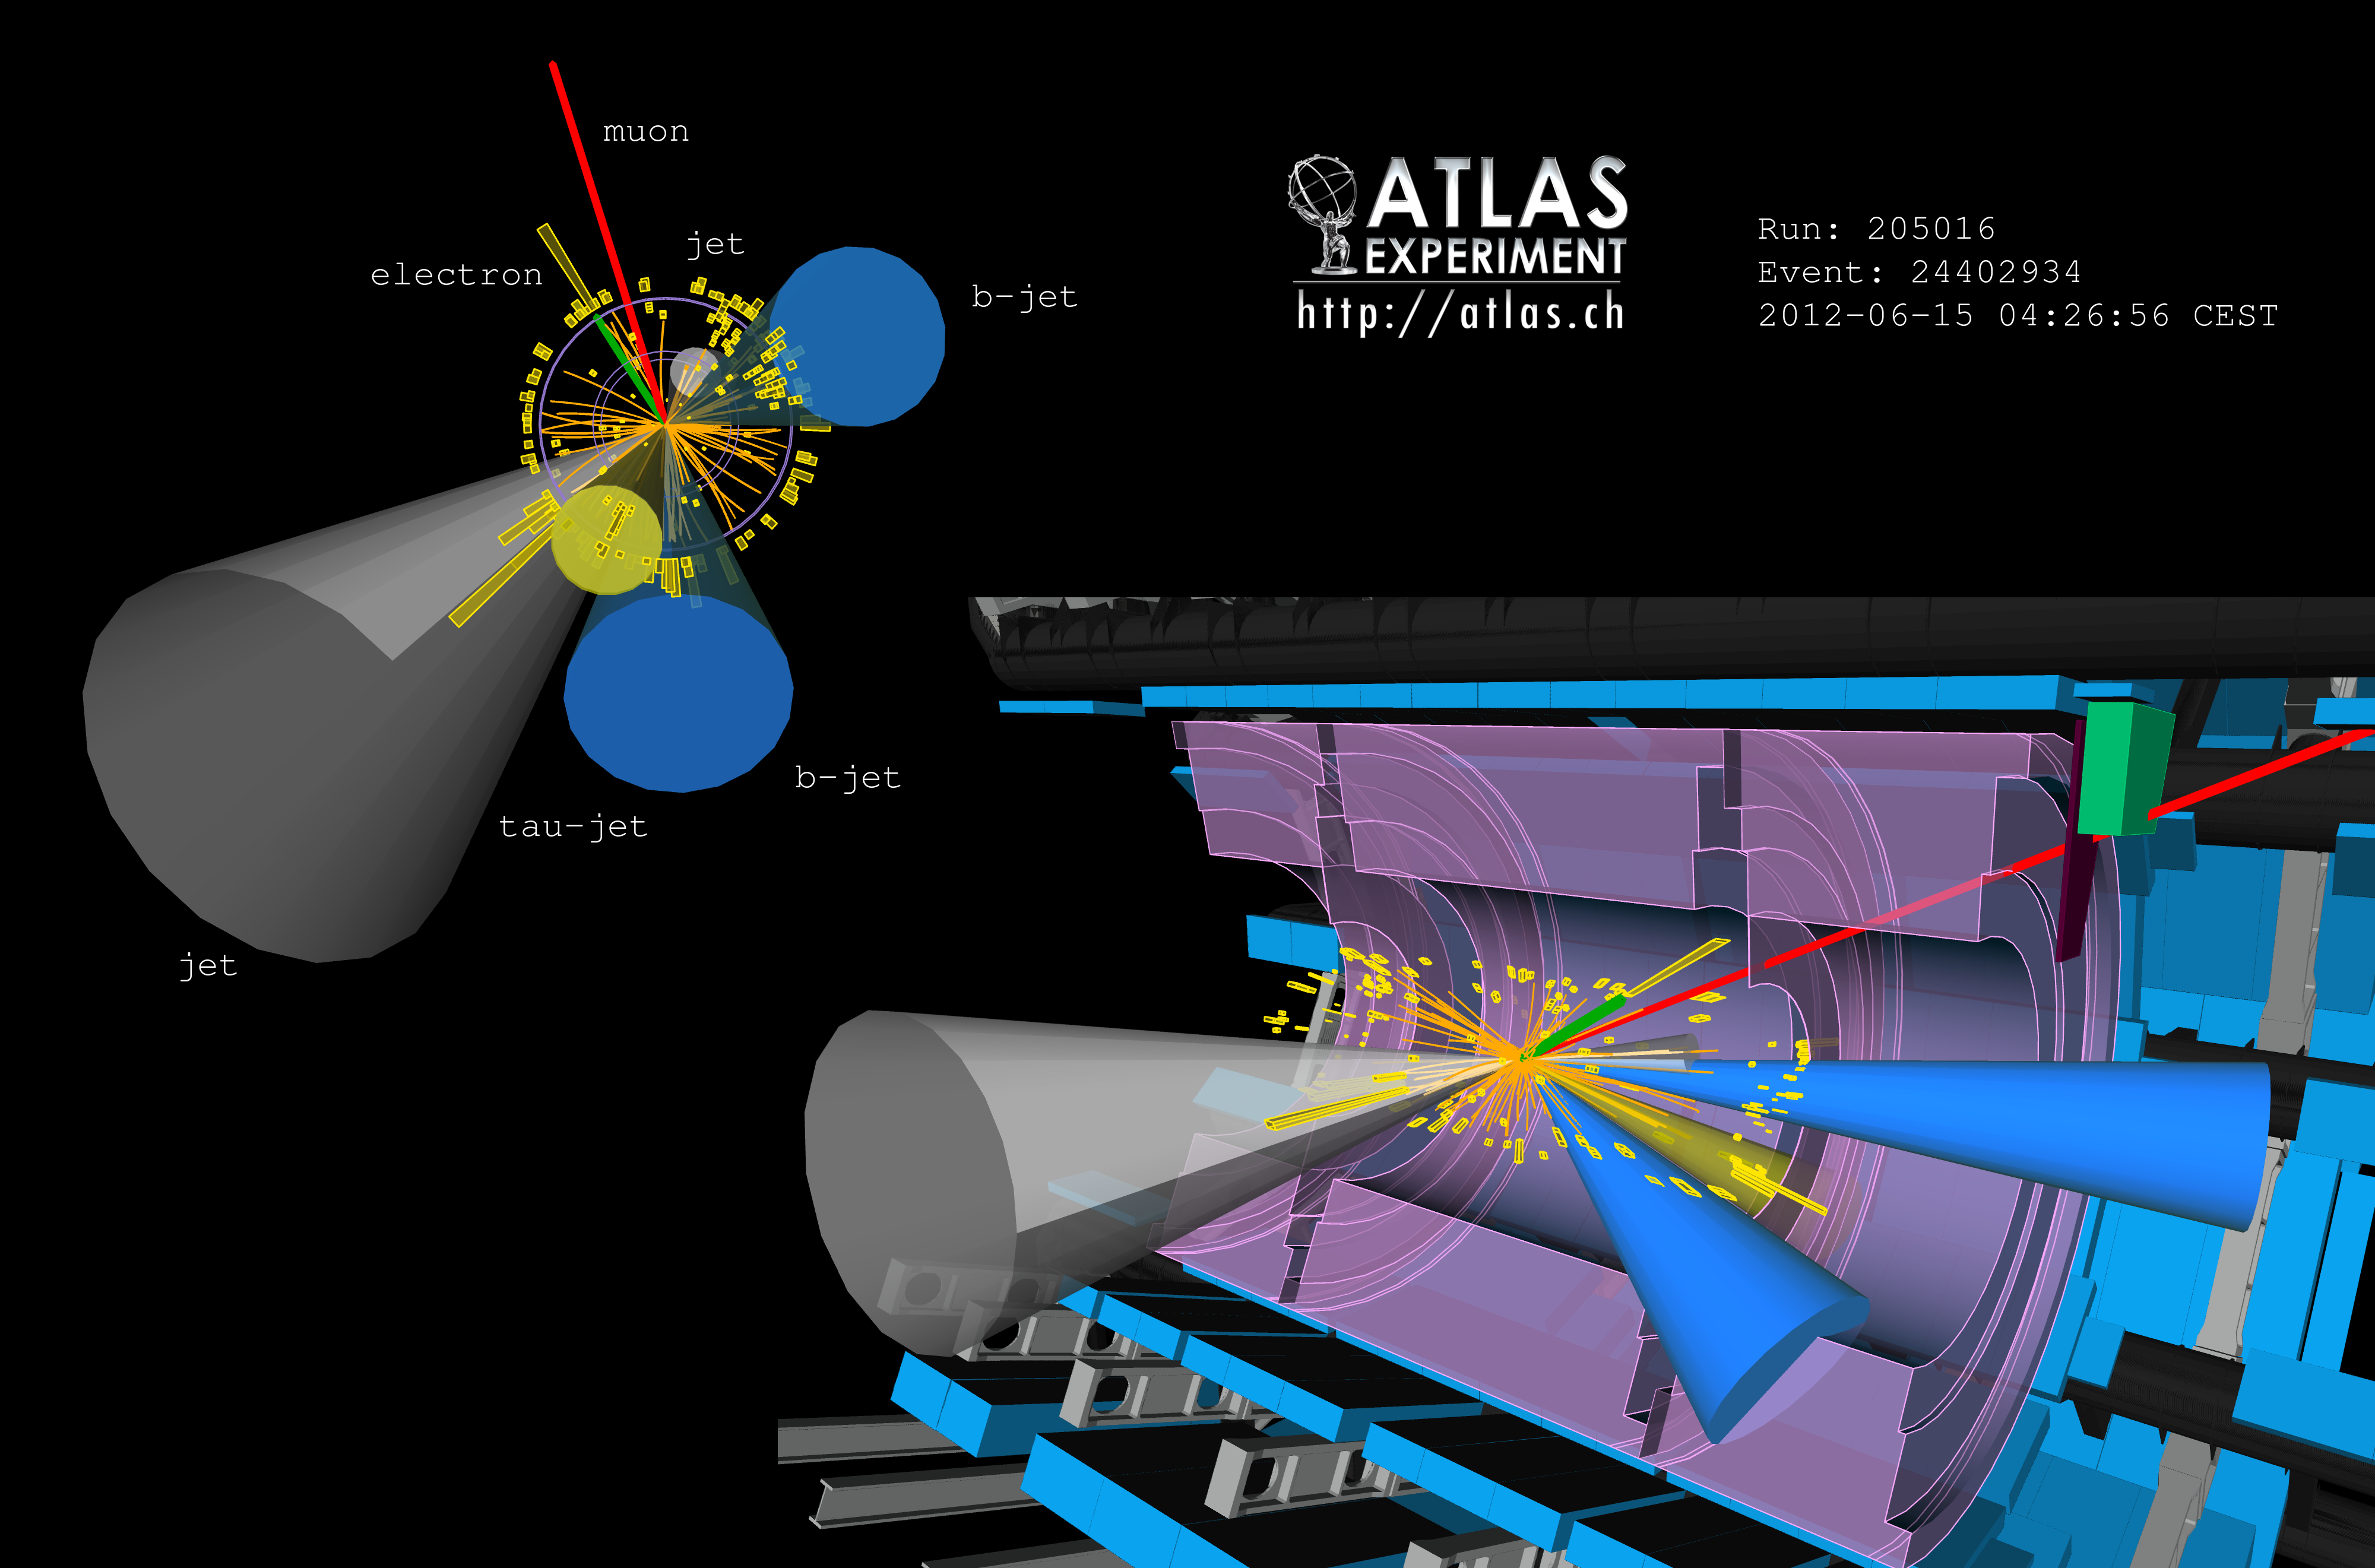 Candidate event in the search for a Higgs boson produced together with a top-antitop quark pair.